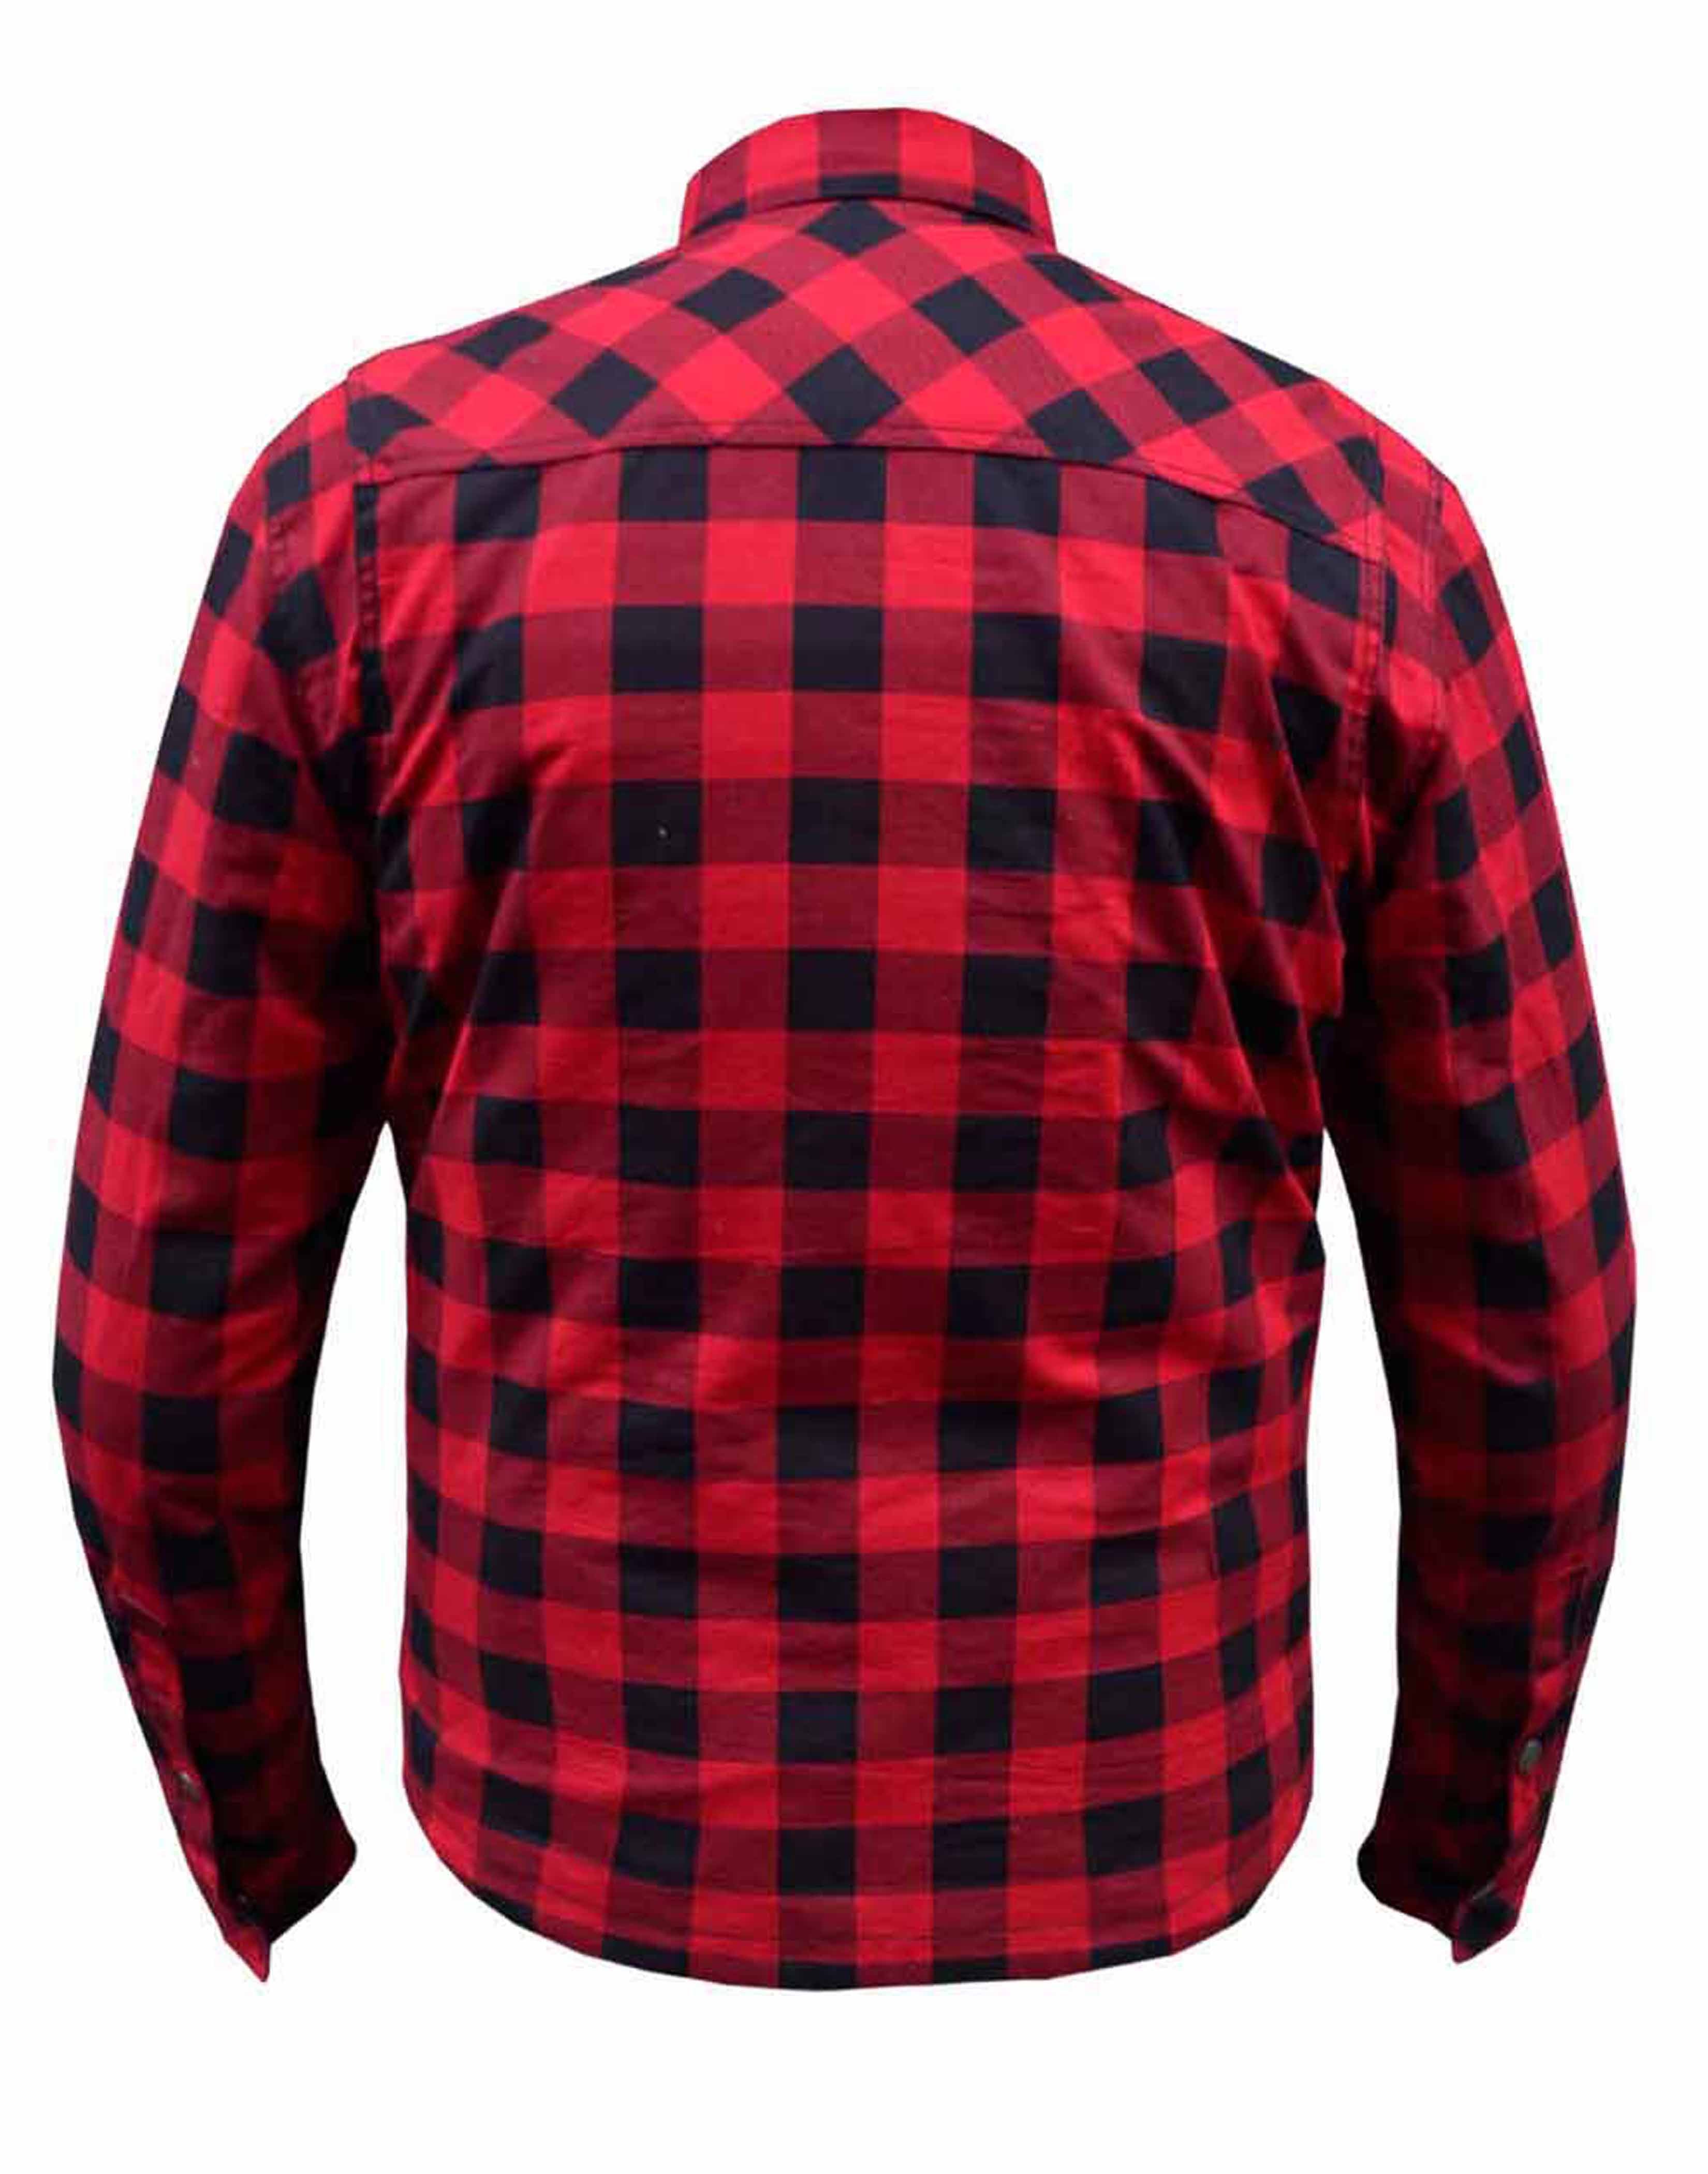 Unik International Mens Black and Red Riding Flannel